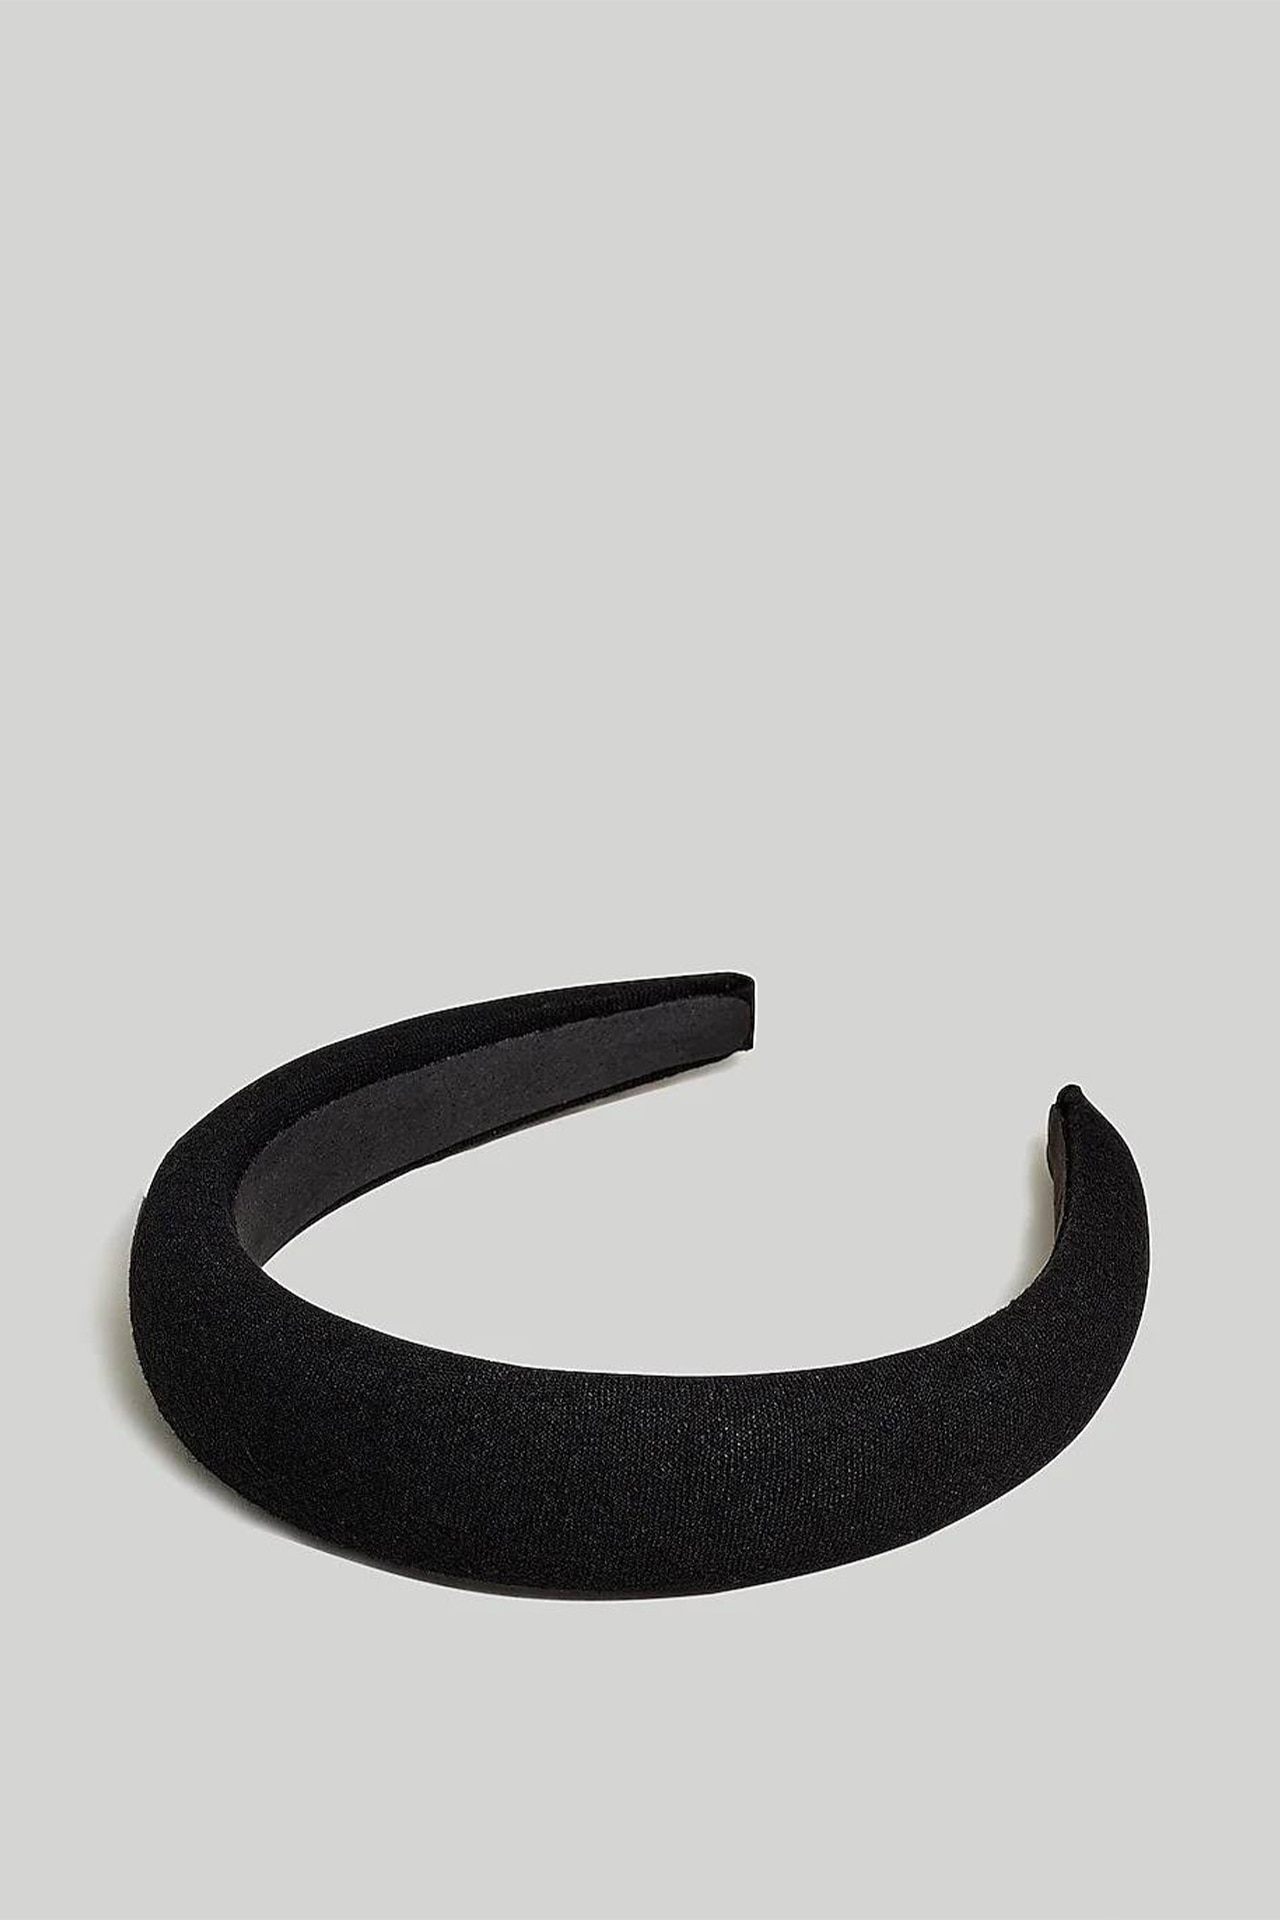 The Padded Headband Is Back, and It's the Quickest Route to a